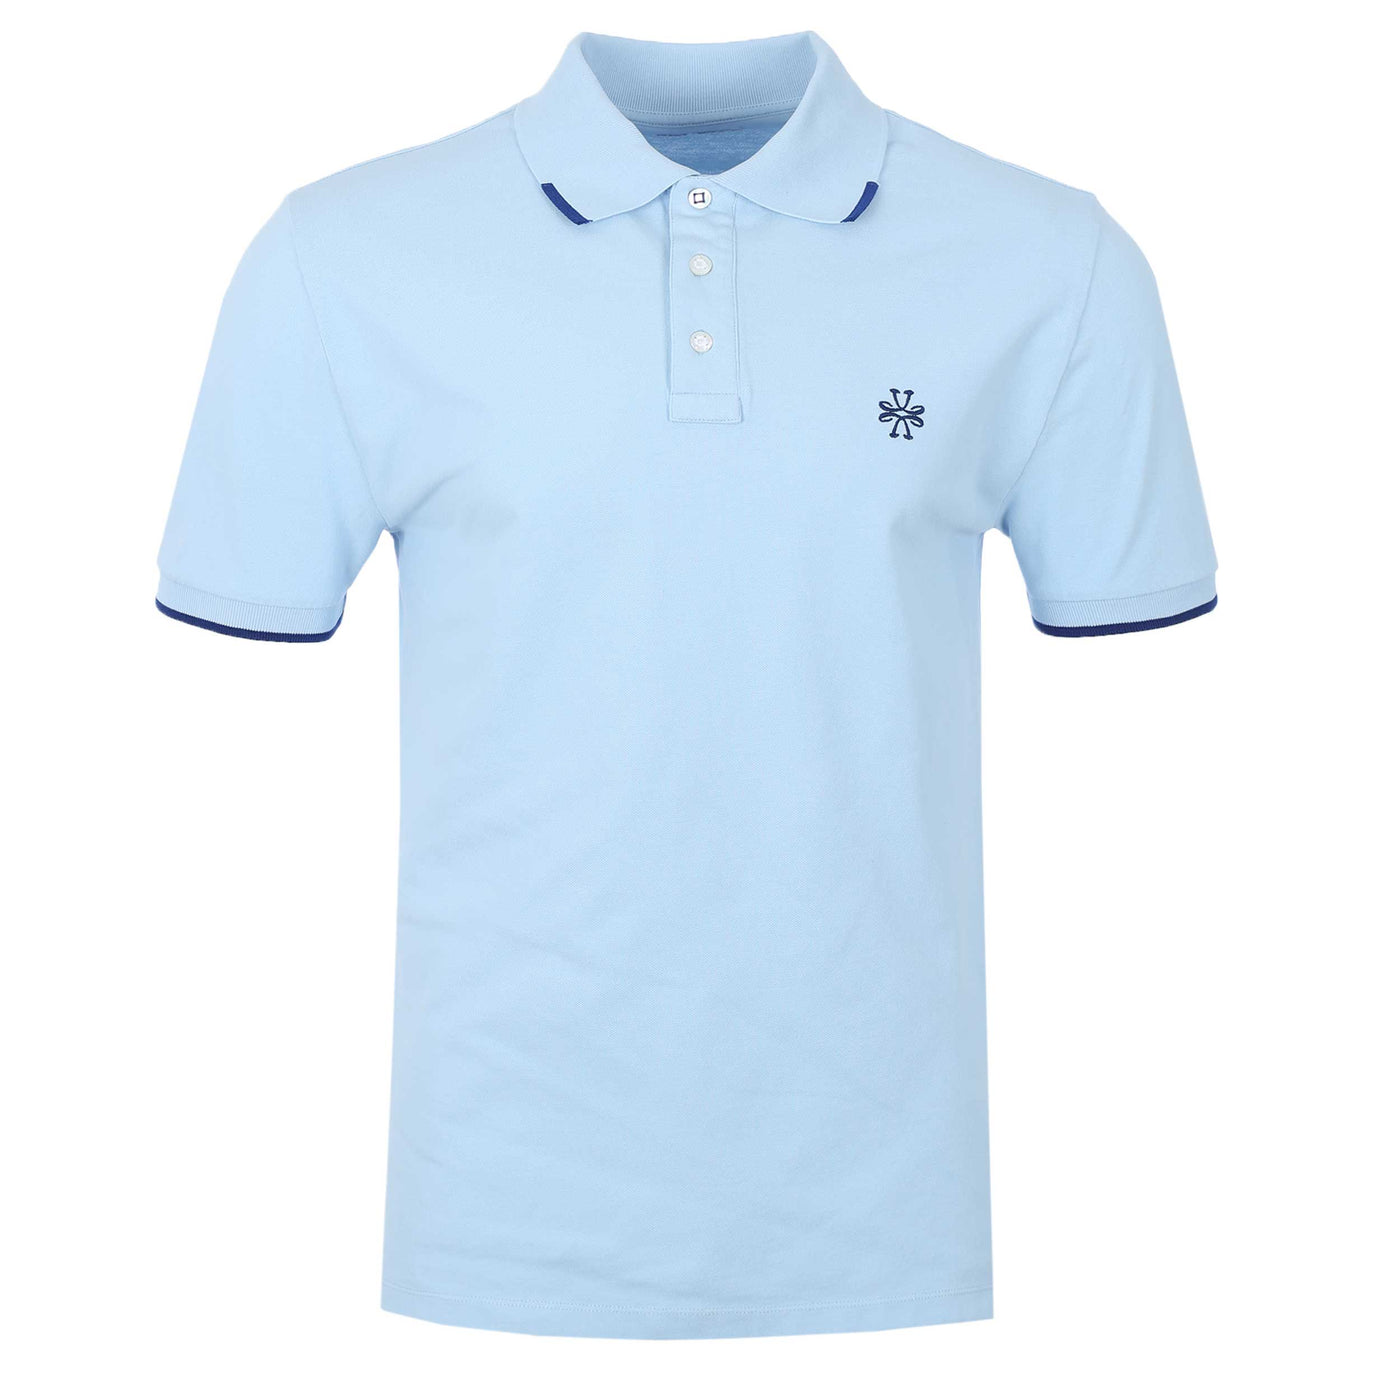 Jacob Cohen Tipped Polo Shirt in Sky BlueJacob Cohen Tipped Polo Shirt in Sky Blue